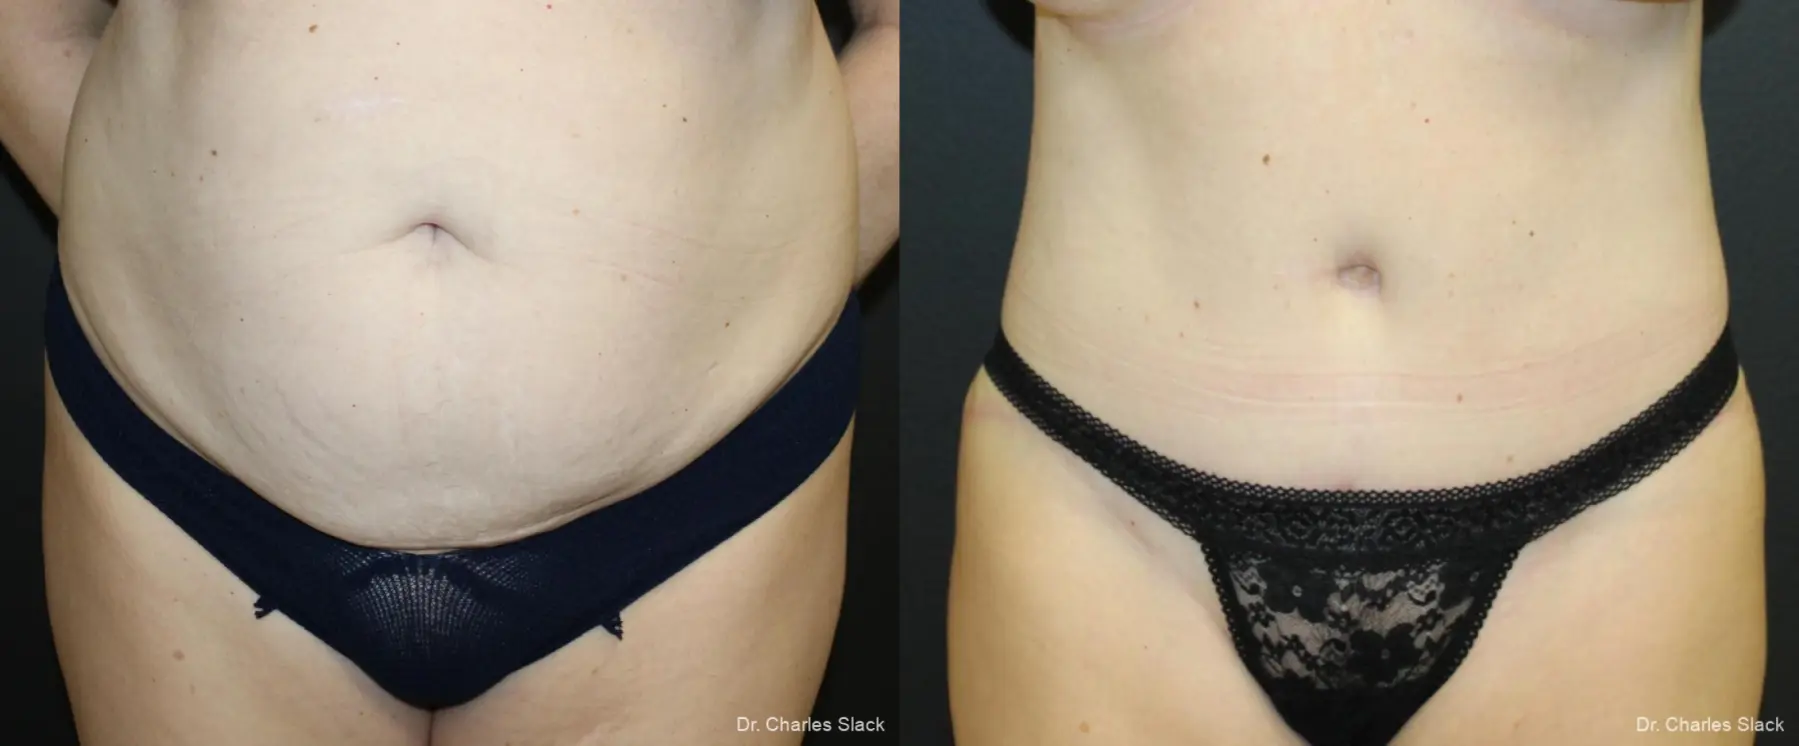 360 Body Contour: Patient 1 - Before and After  